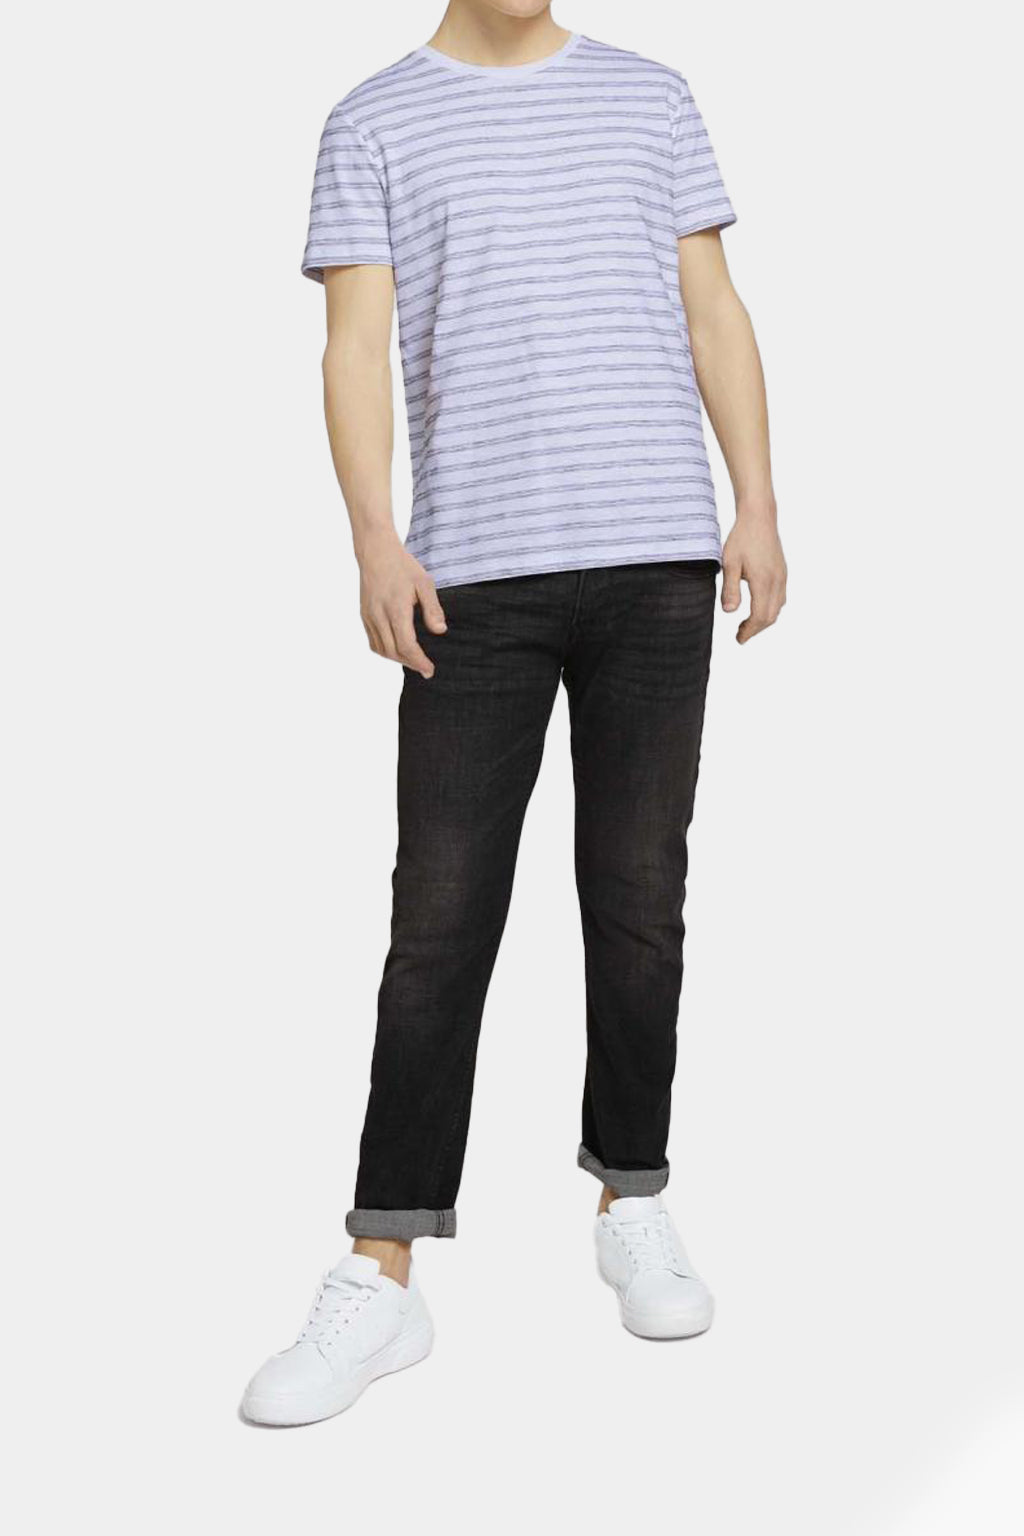 Tom Tailor - Striped T-Shirt